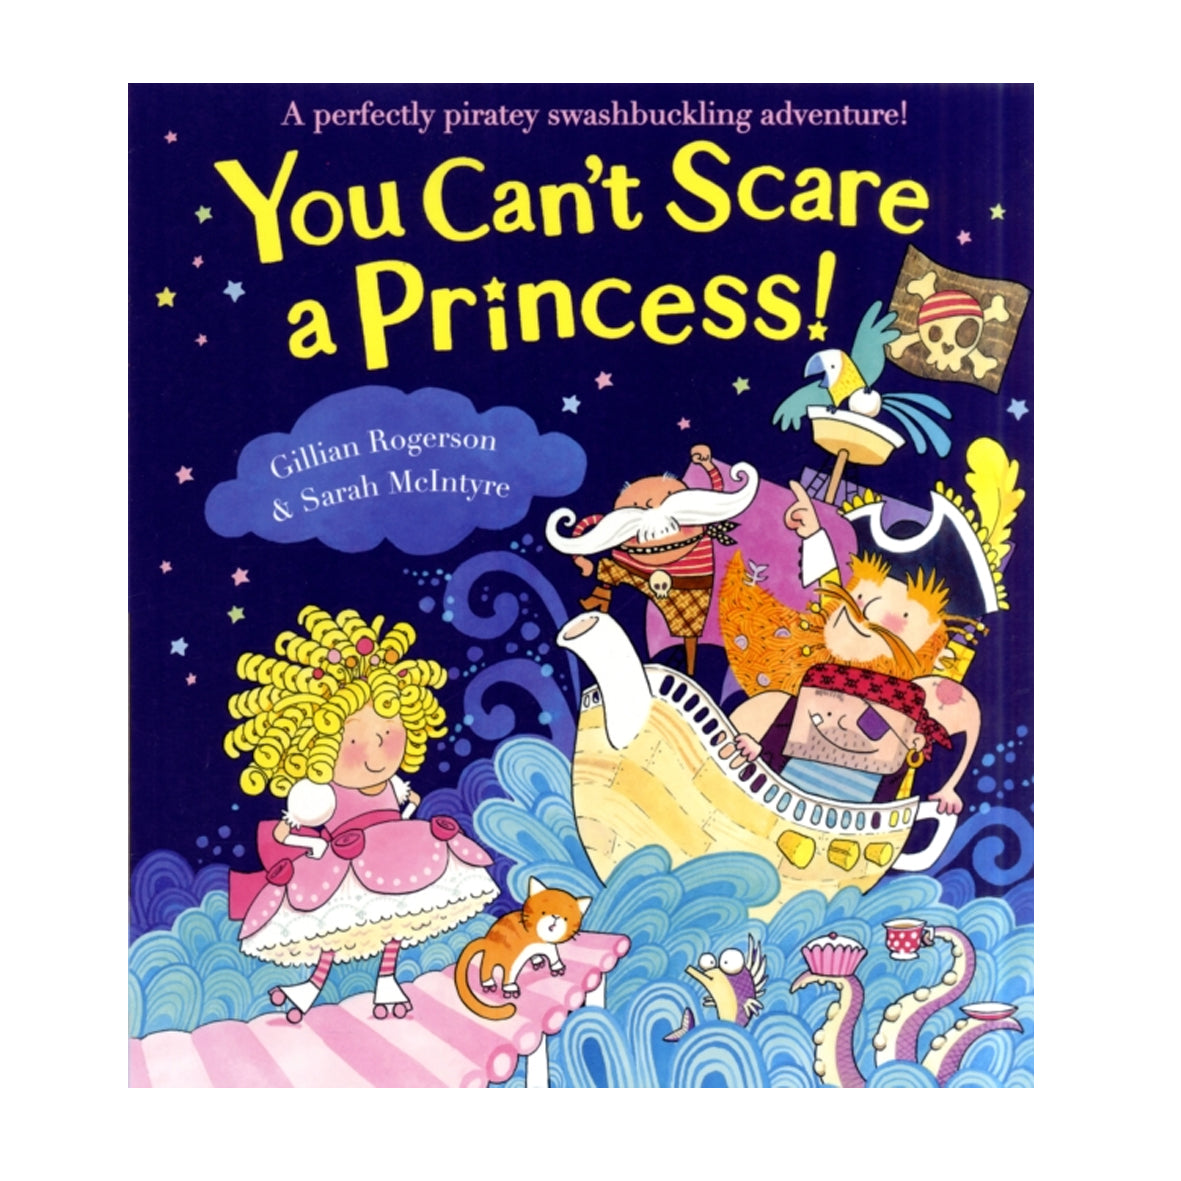 Book - You Can't Scare a Princess